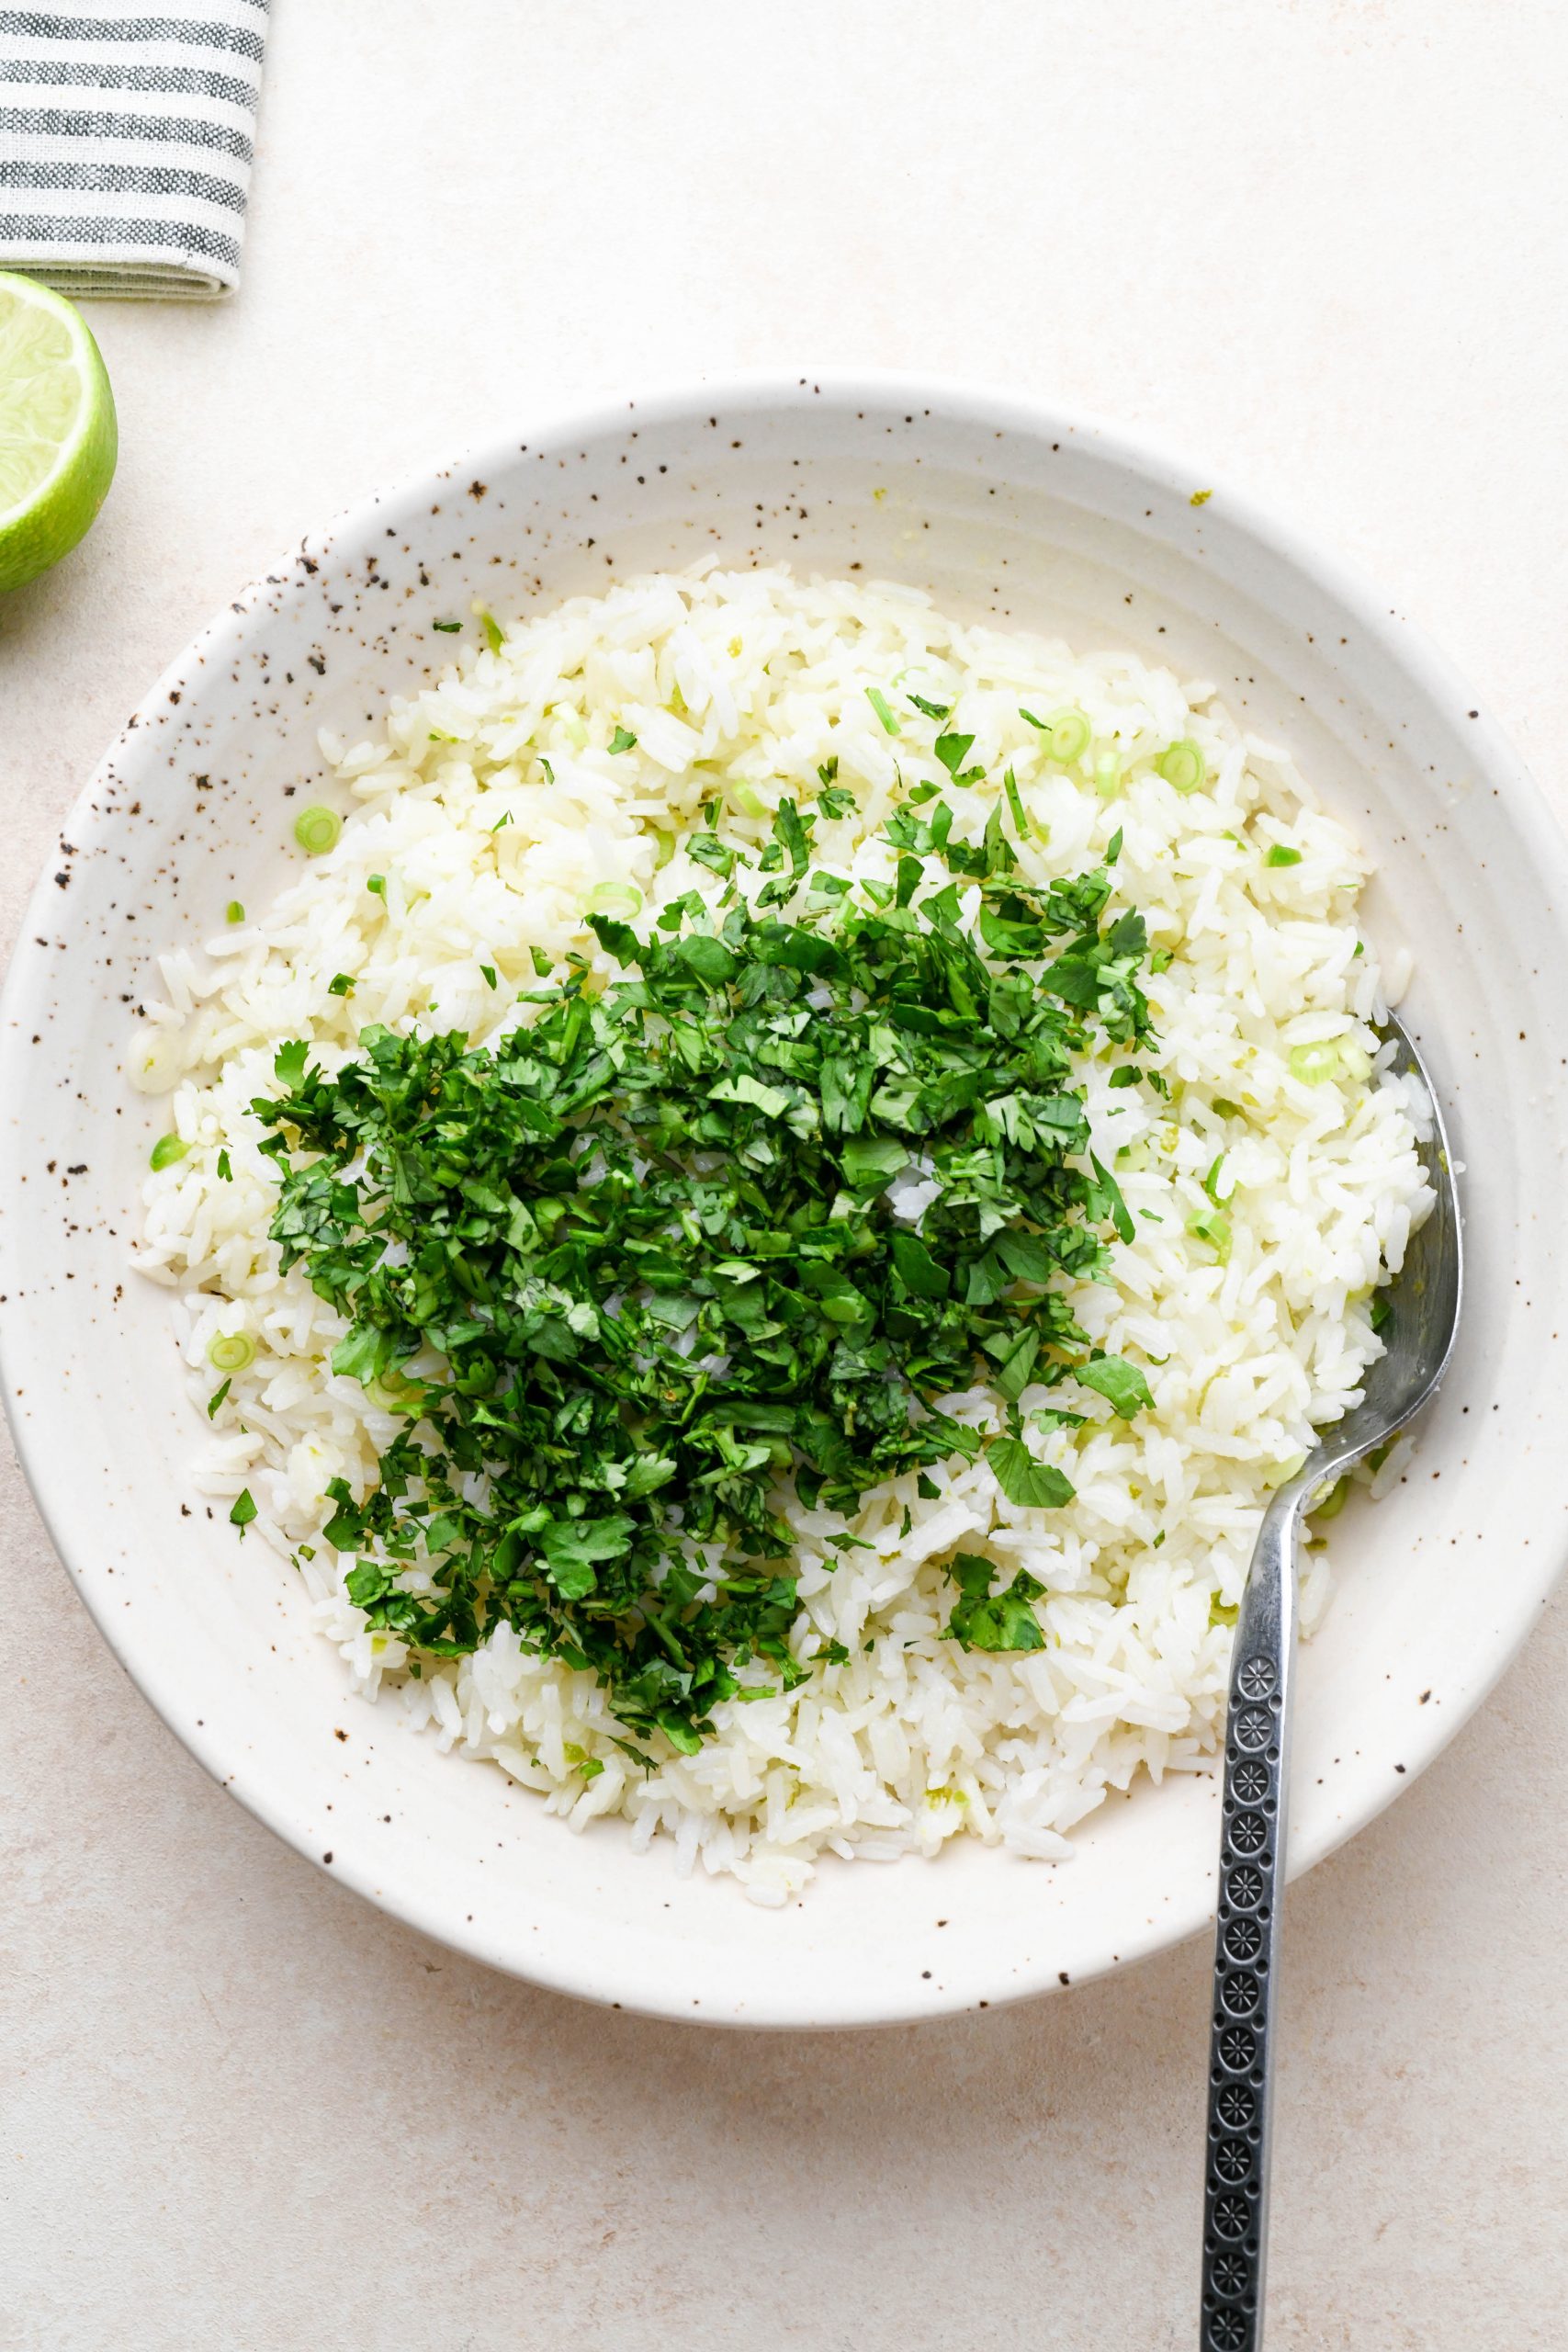 How to make cilantro lime rice: White rice and lime juice mixture topped with fresh cilantro.